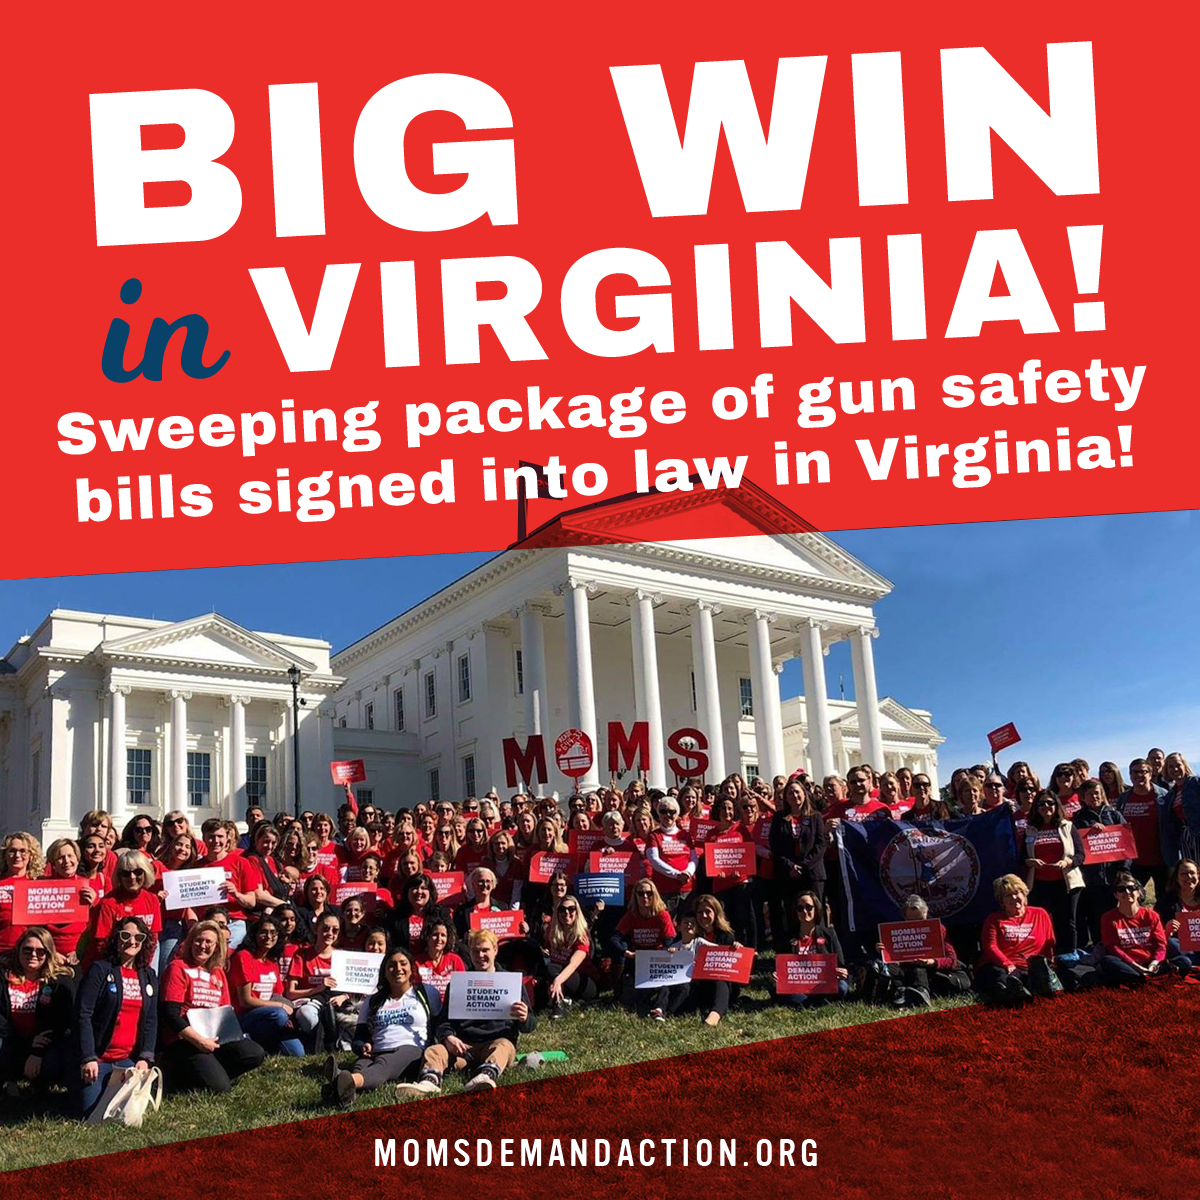 Big win in Virginia! The Governor has signed a sweeping package of gun safety bills into law!